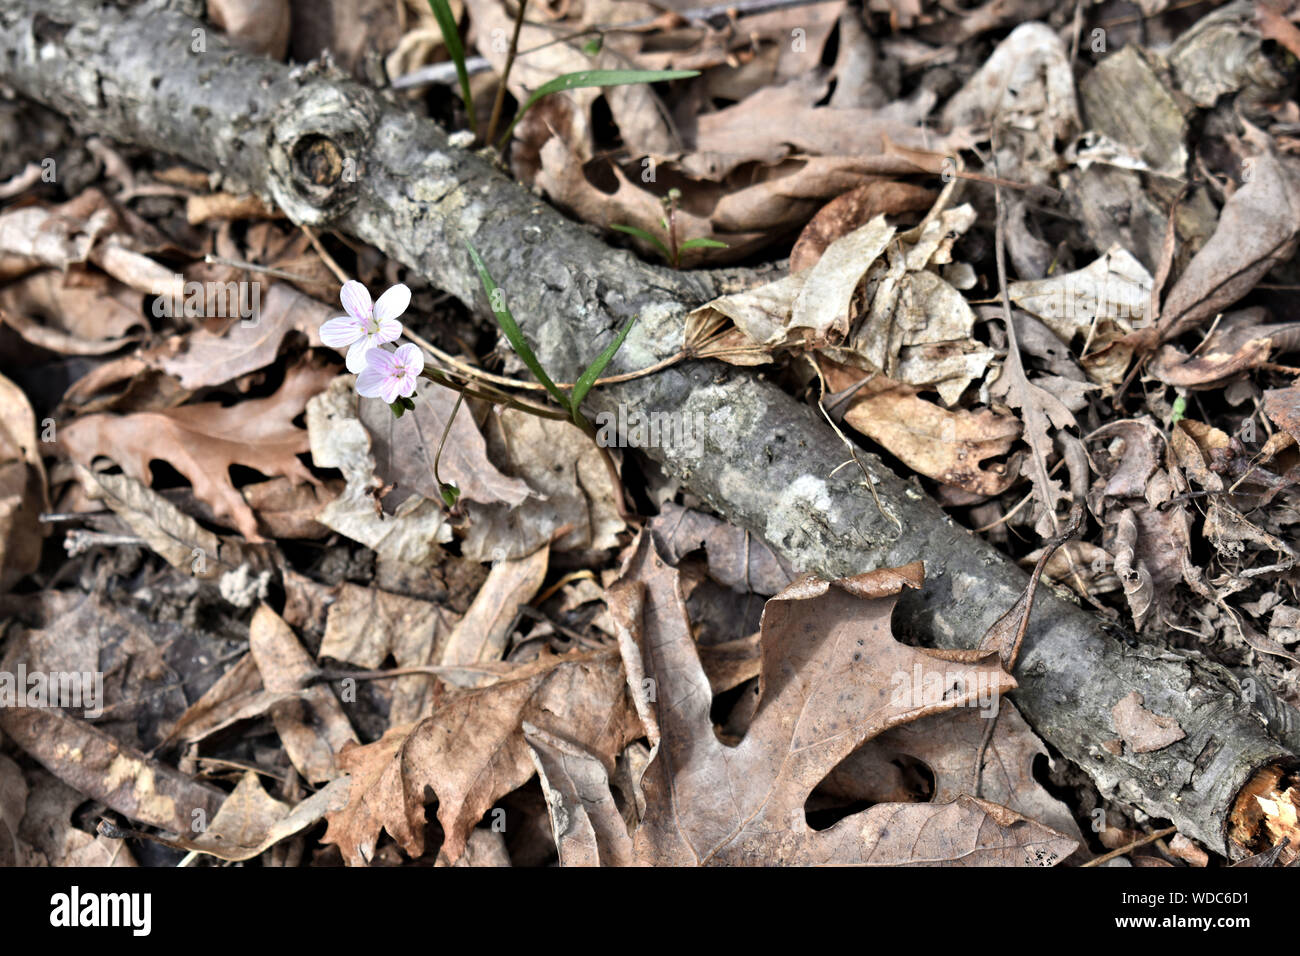 A branch laying among fallen leaves with two Spring Beauty Flowers beside it on the forest floor. Stock Photo